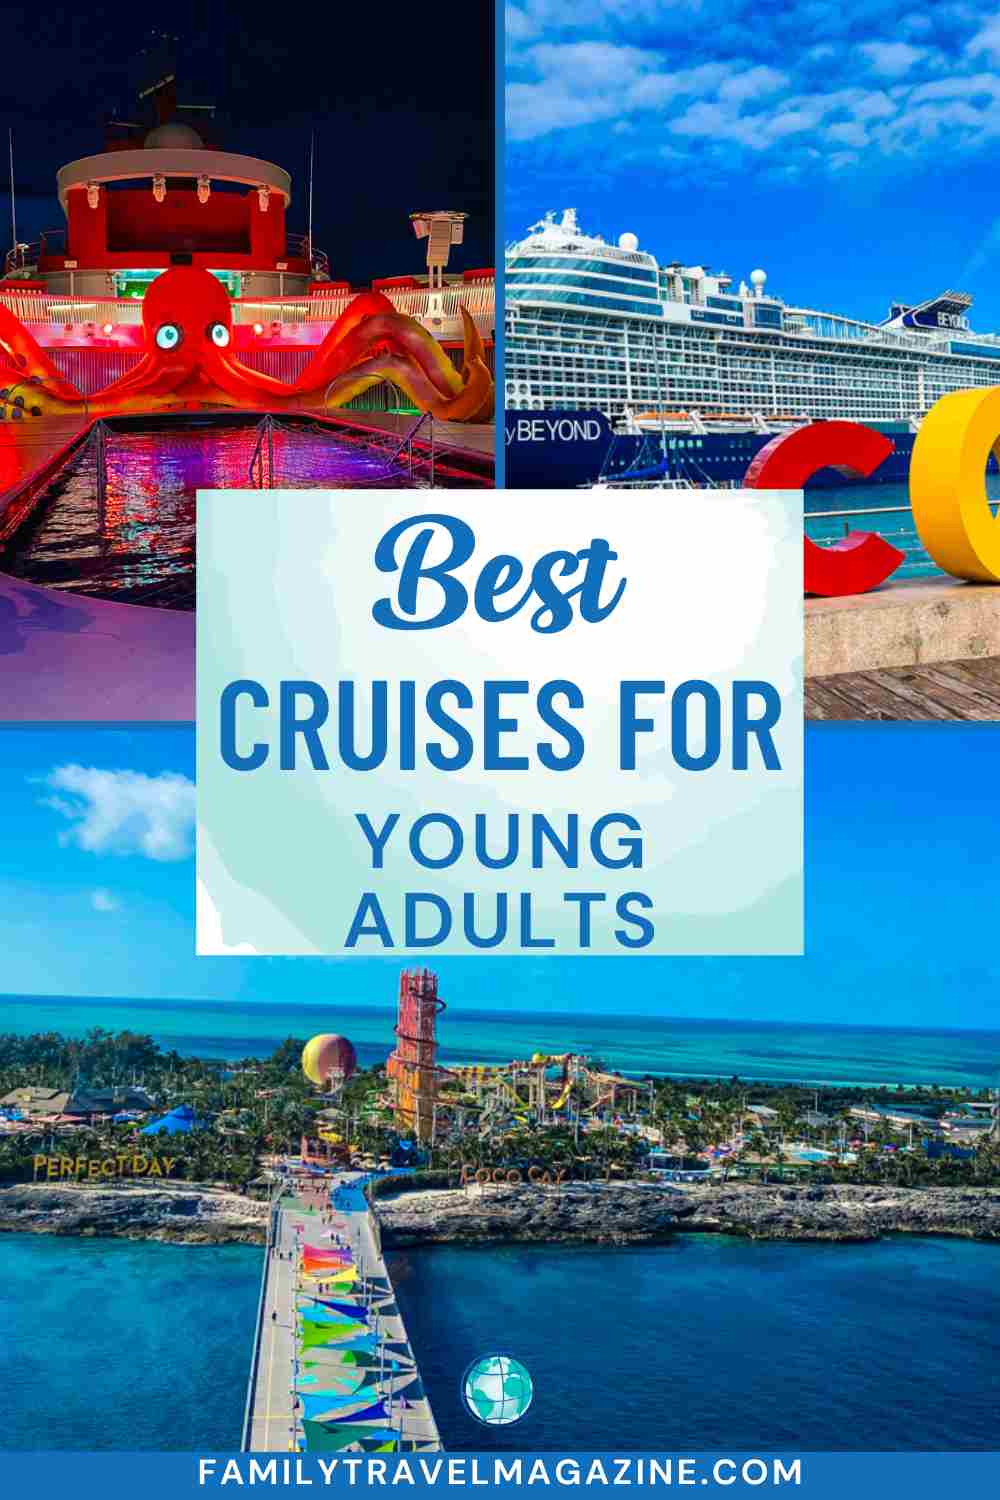 Inflatable red octopus on pool deck, Celebrity ship docked at Cozumel, Perfect Day at Coco Cay overhead view with waterslides, hot air balloon, and more.